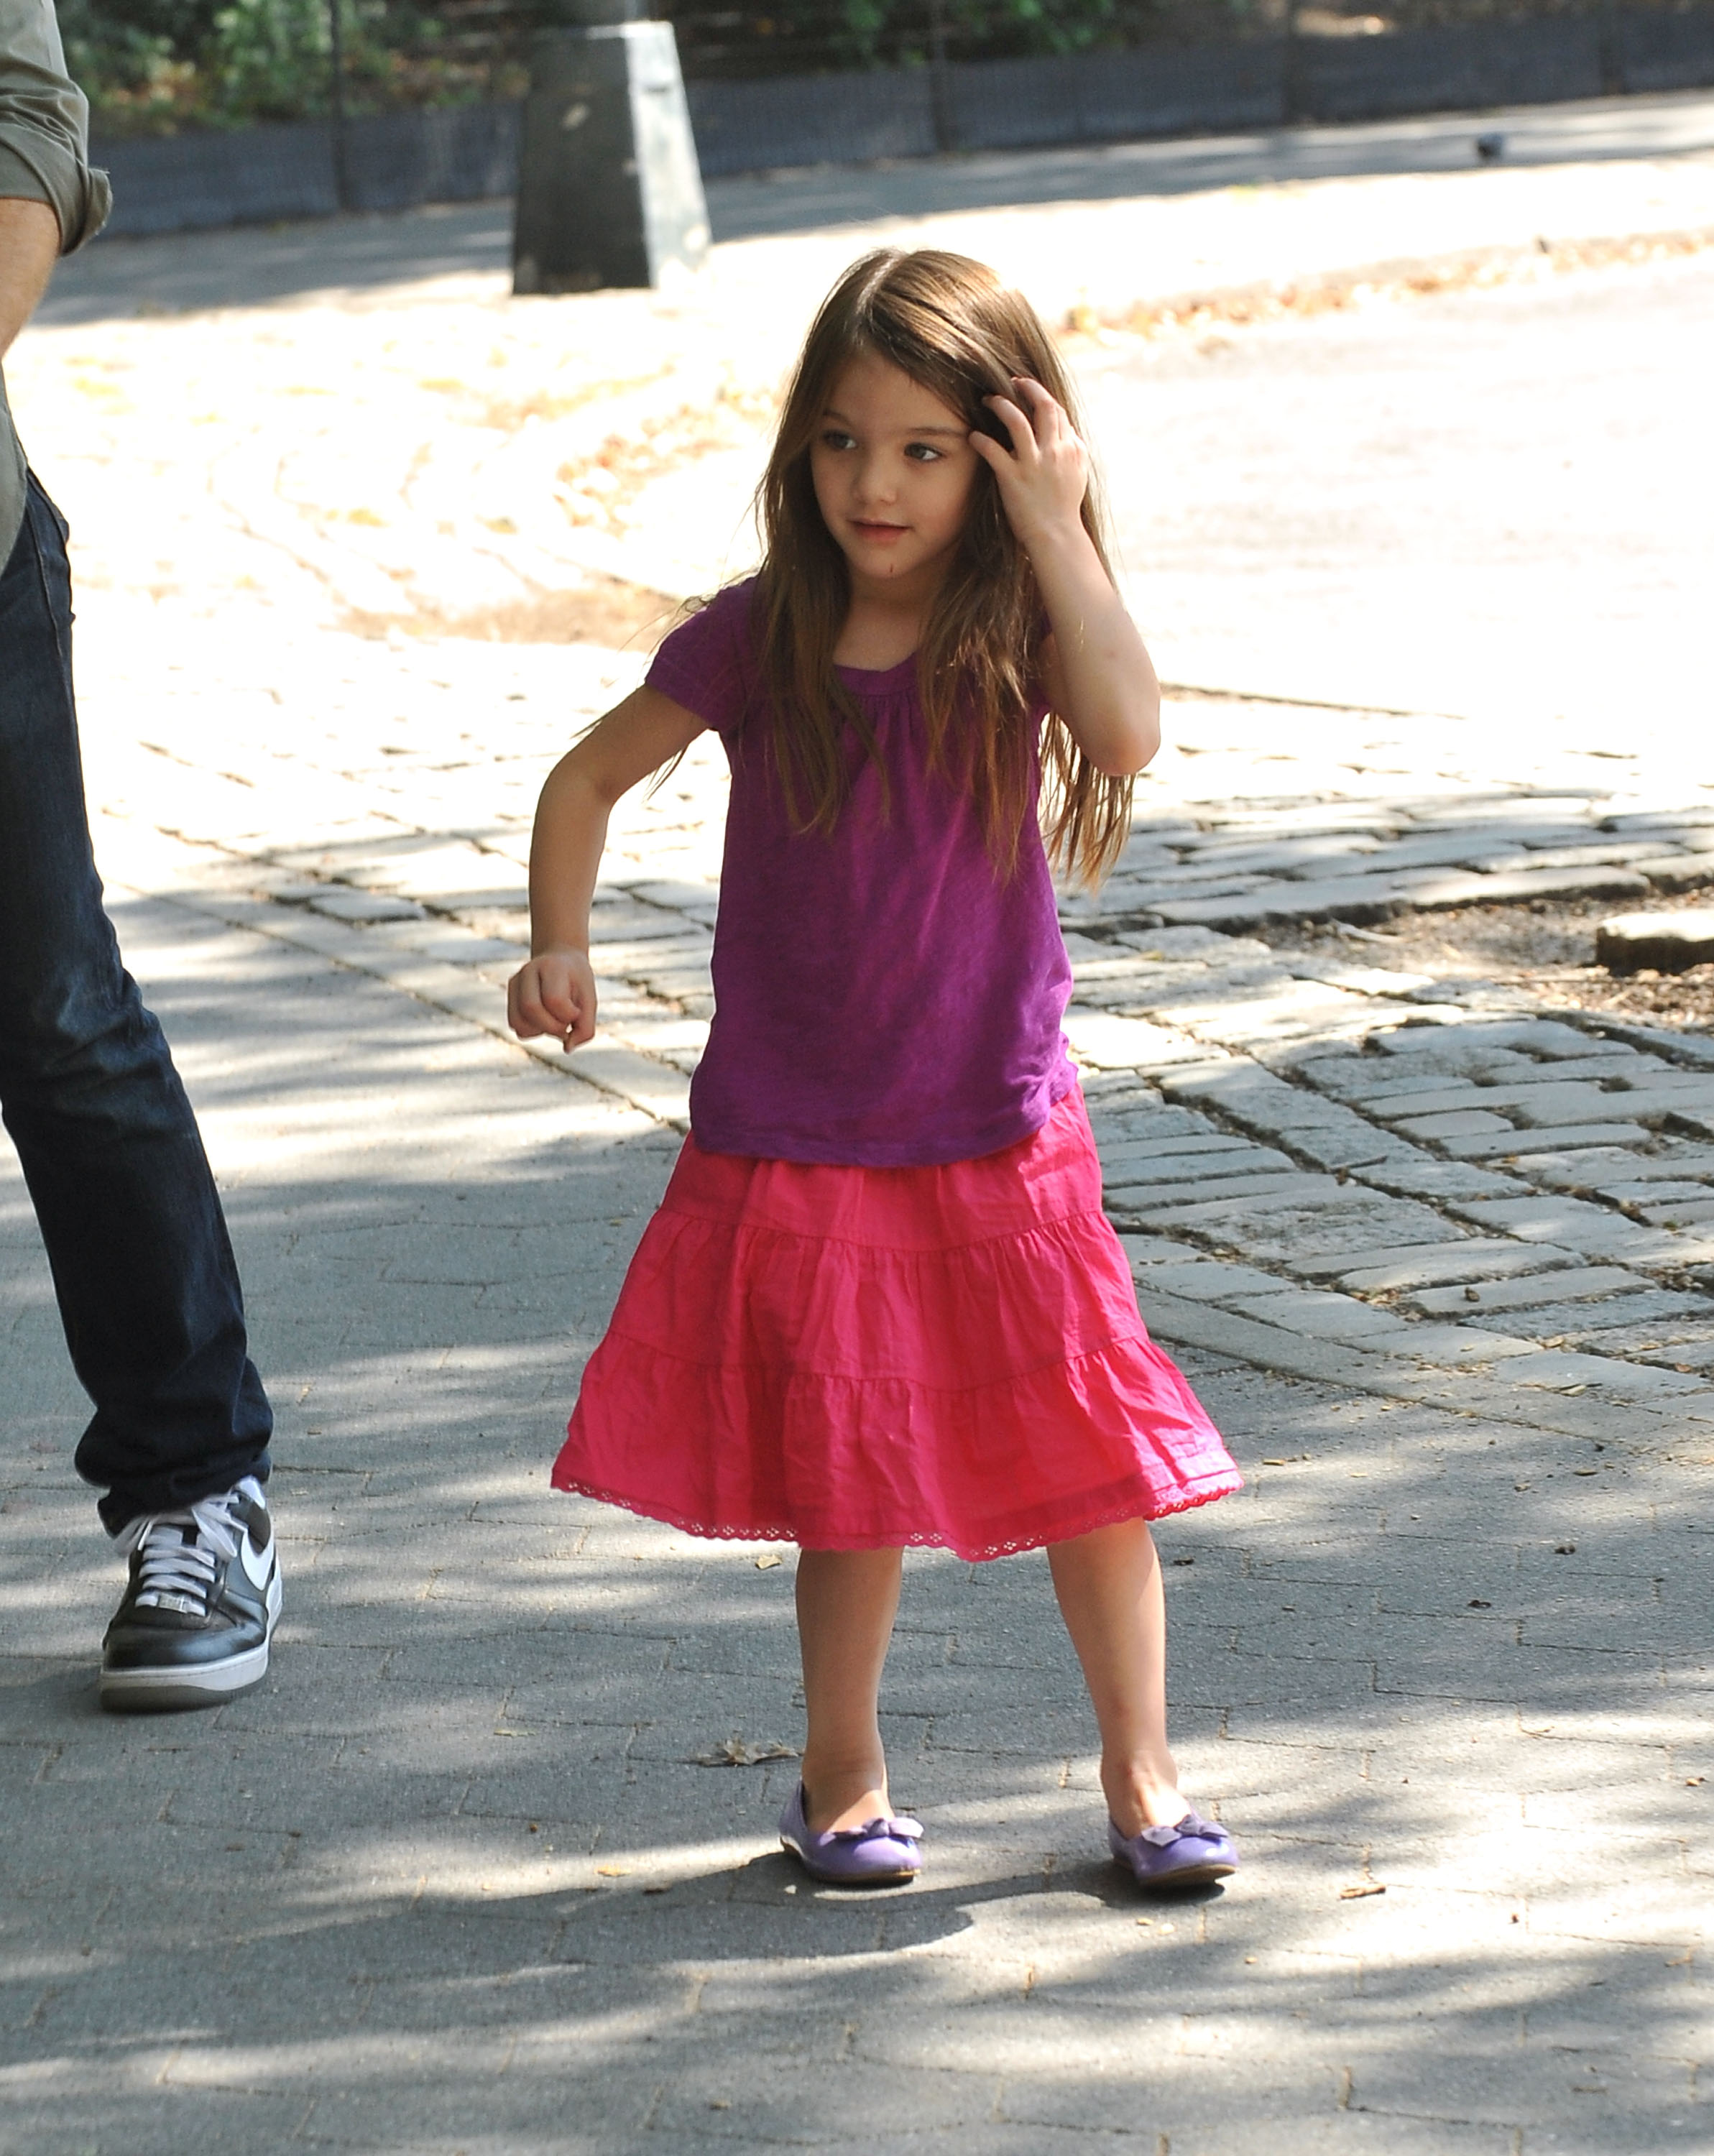 Suri Cruise visits a Central Park West playground on September 7, 2010 in New York City. | Source: Getty Images